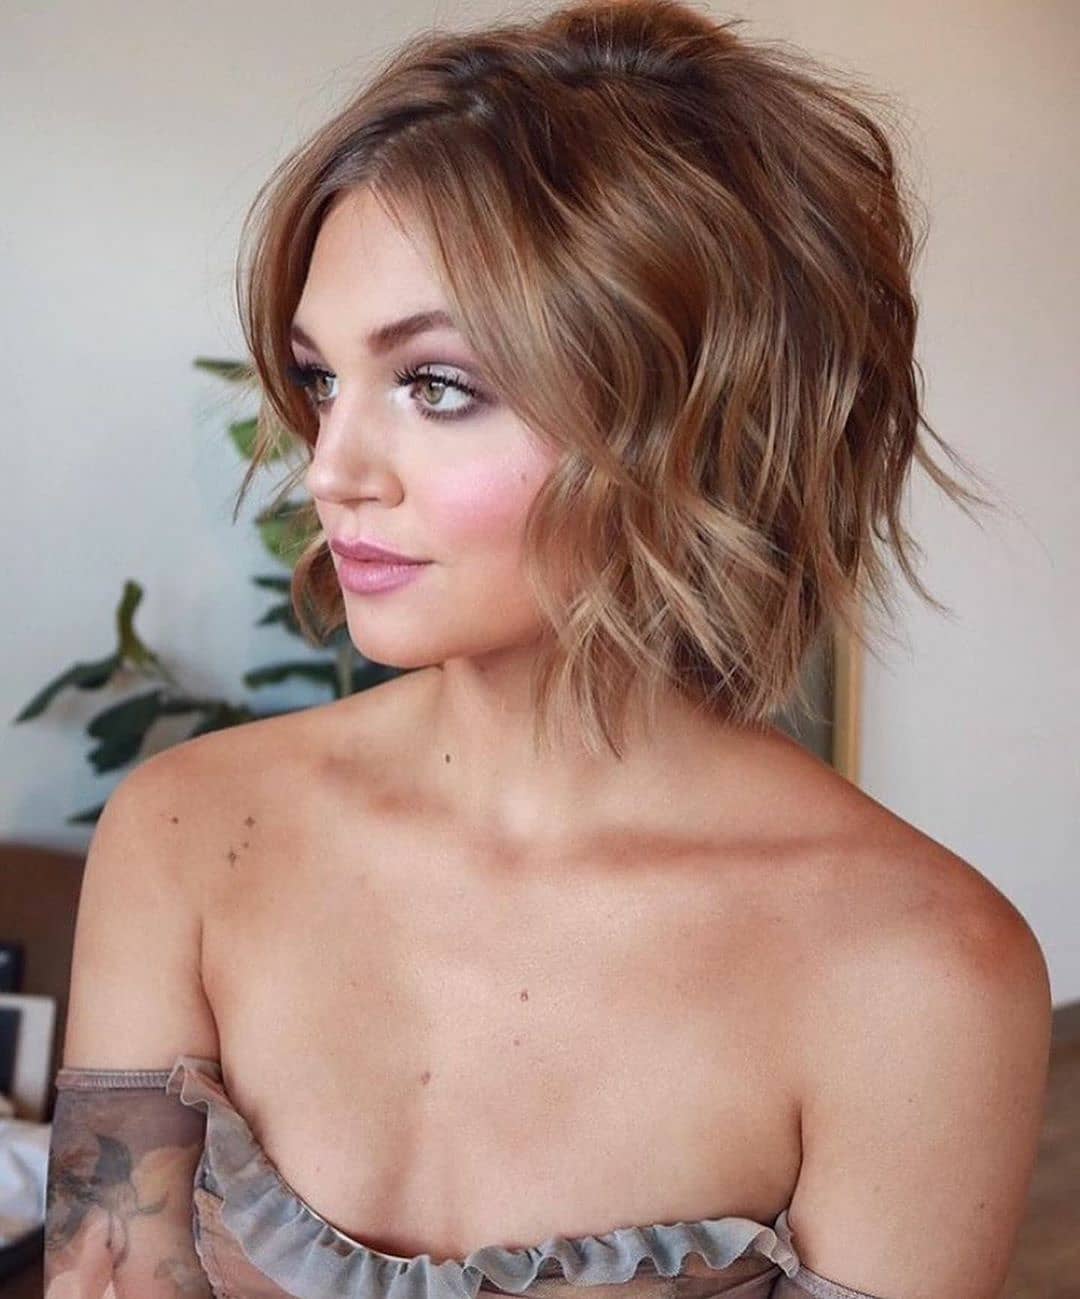 Trendy Short Hair Style with Color - Short Haircut and Hairstyle Ideas of 2021